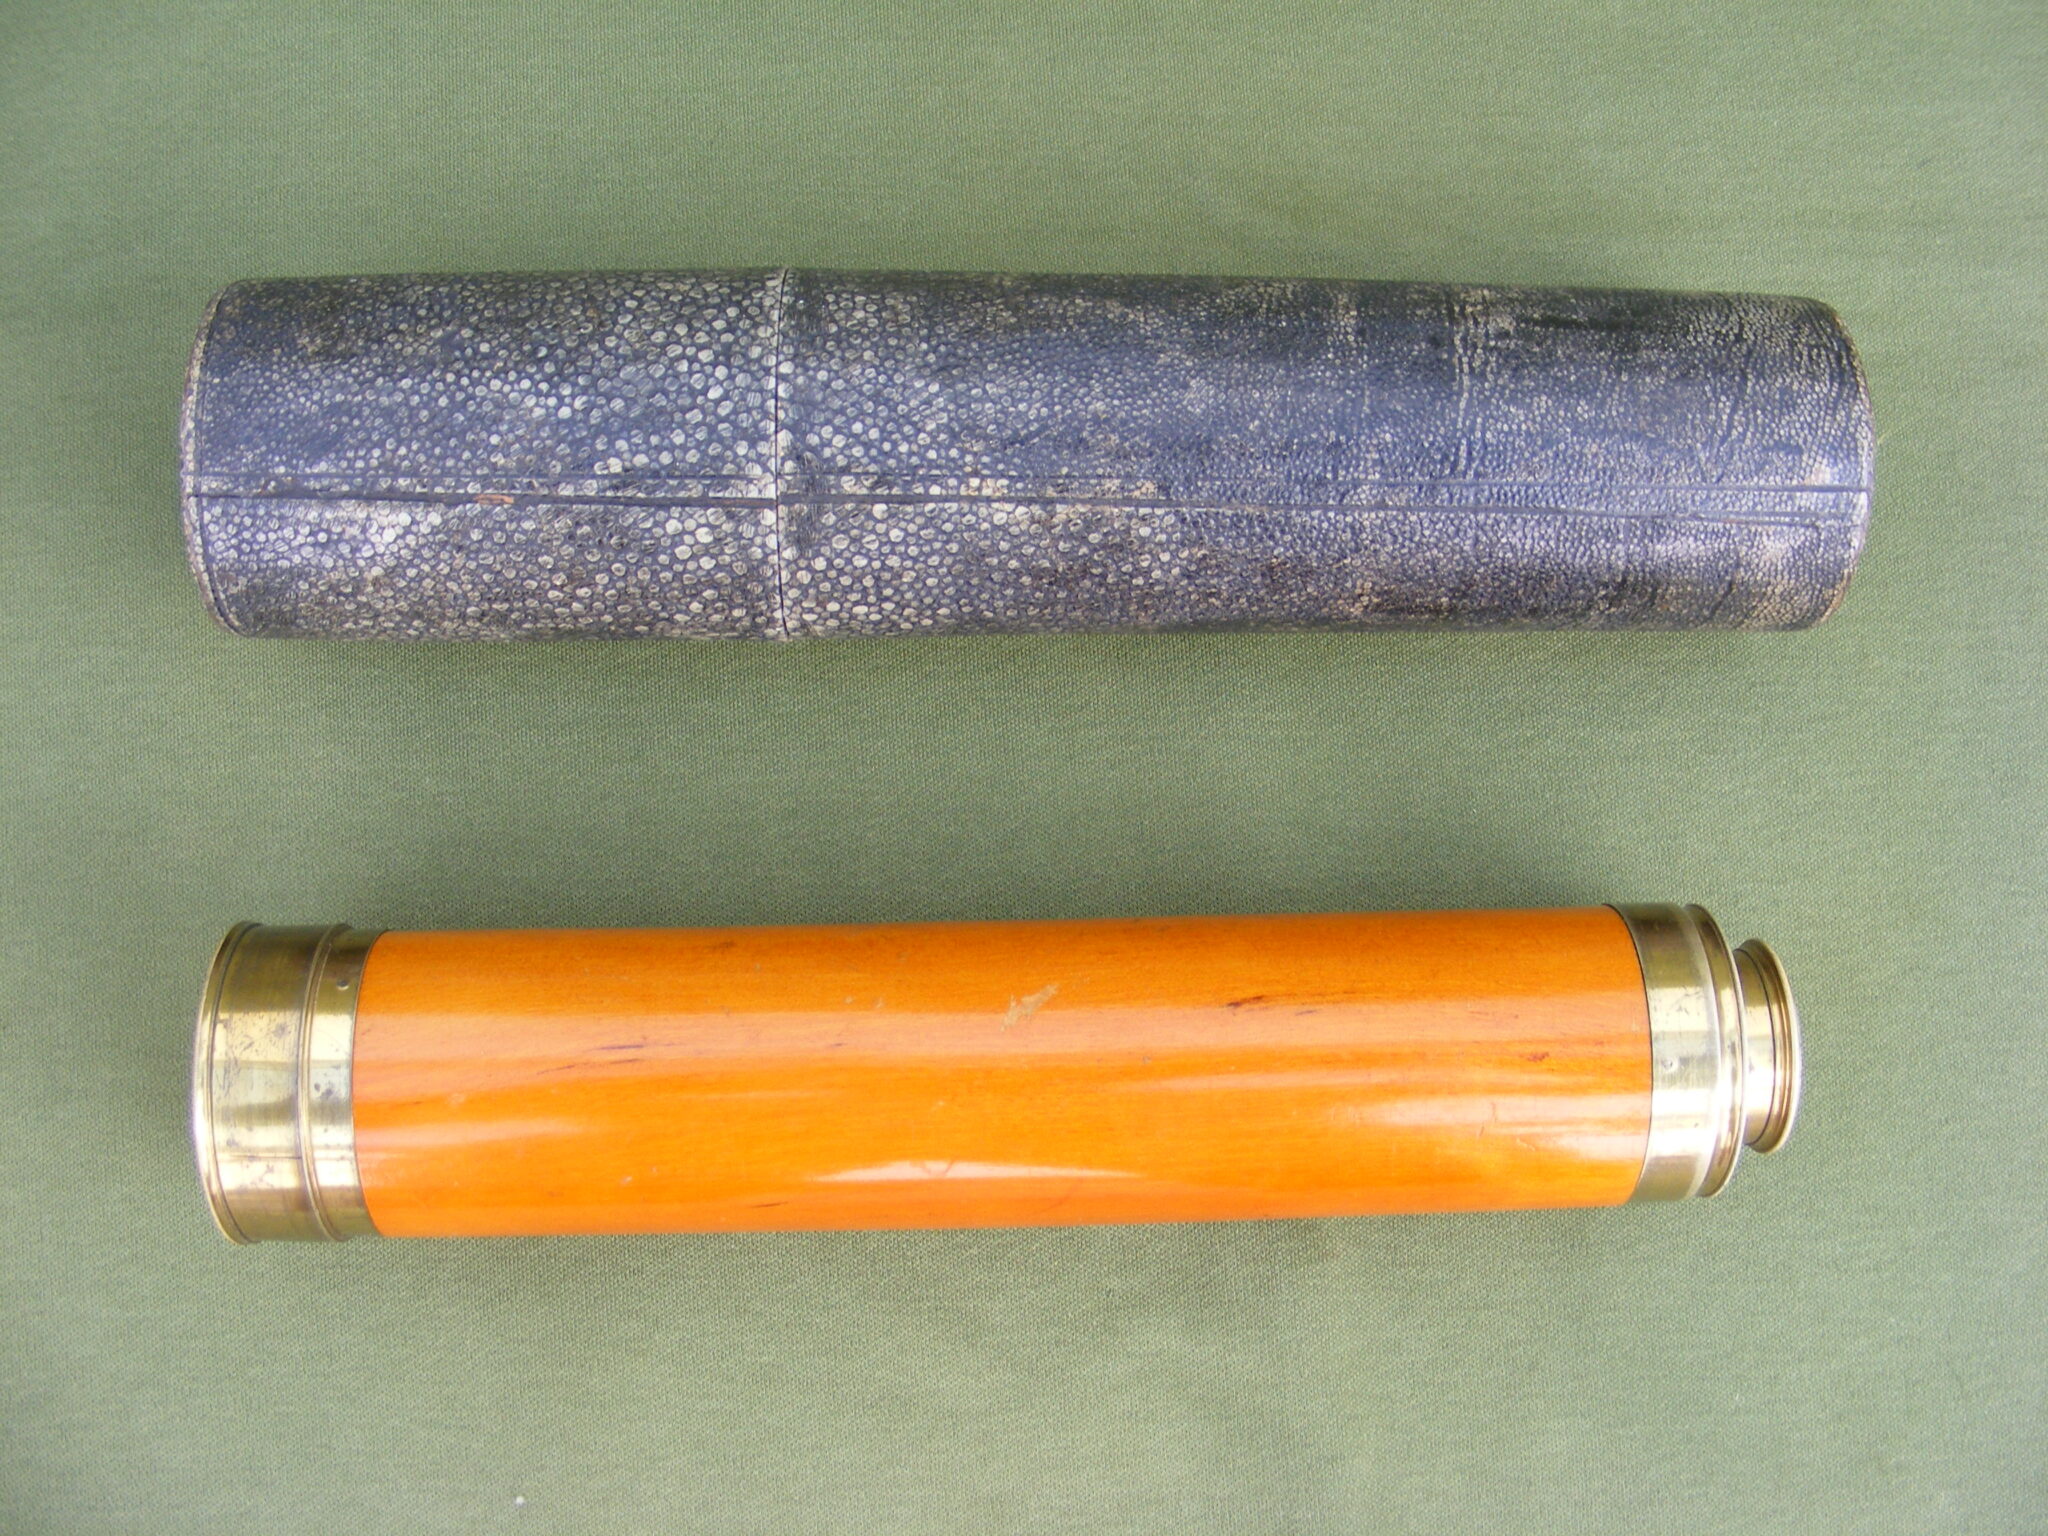 LATE EIGHTEENTH CENTURY TELESCOPE BY LINCOLN